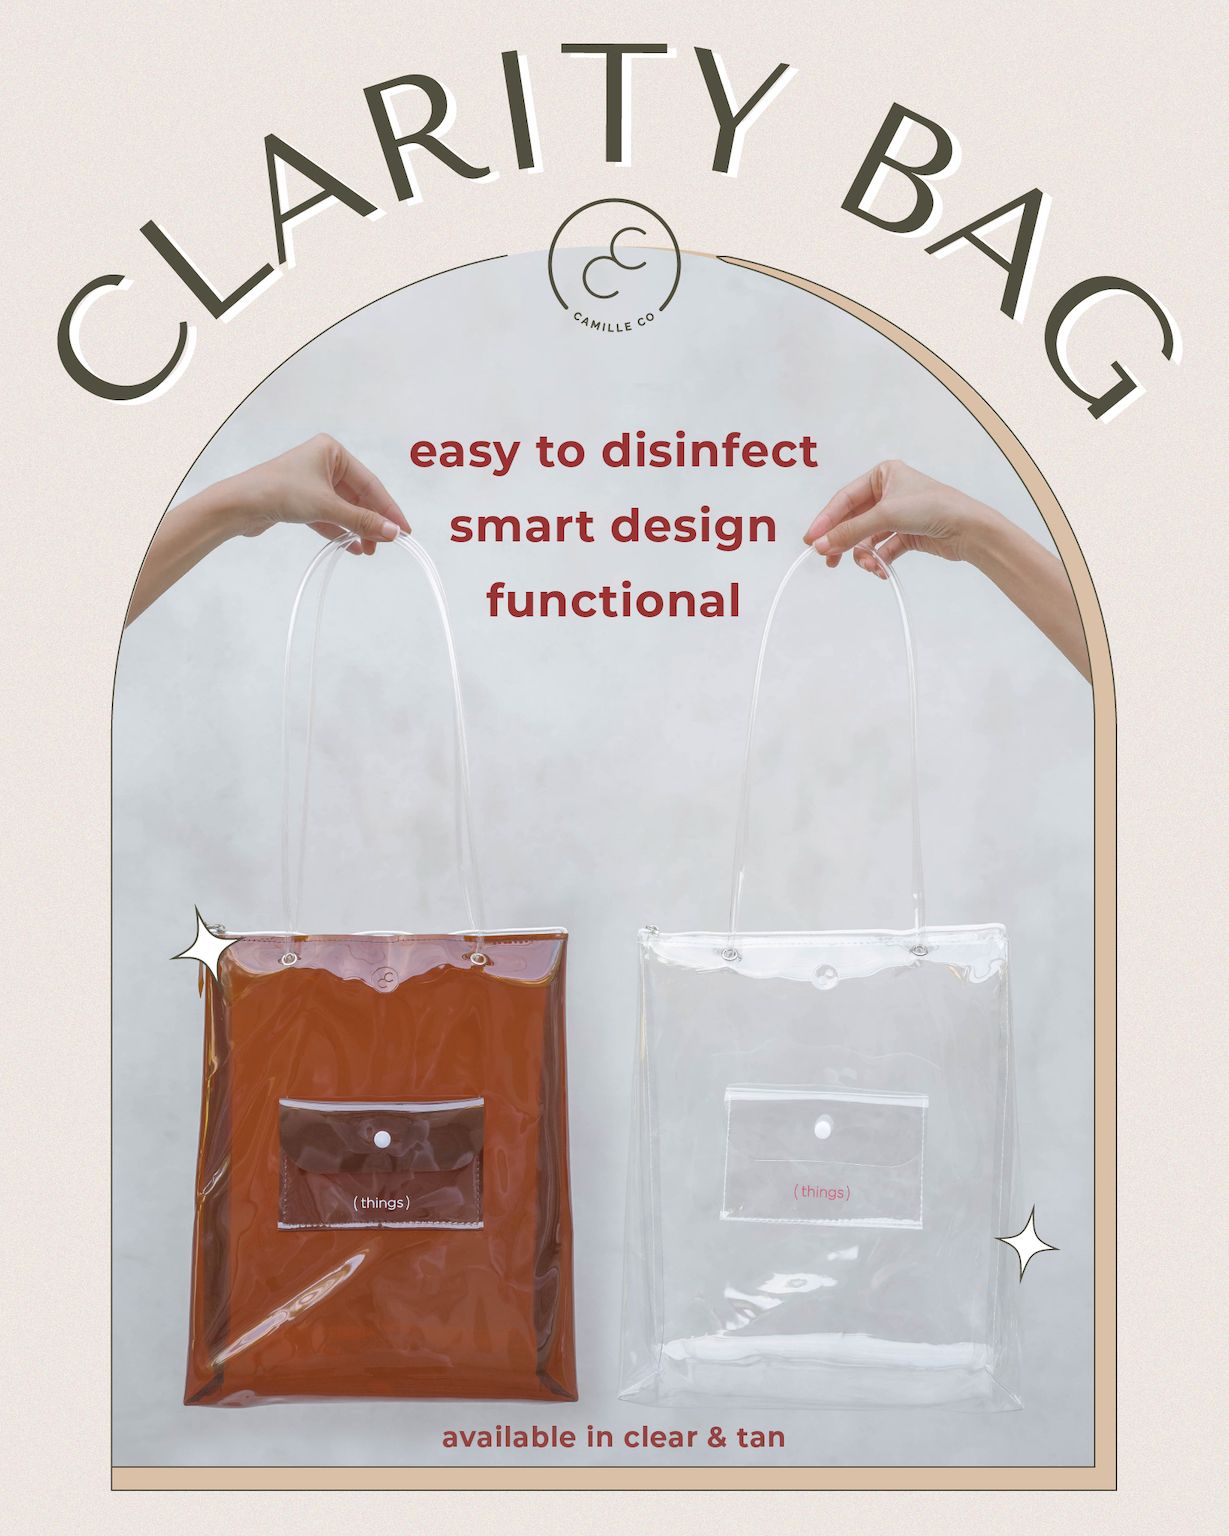 Clarity bag disinfection